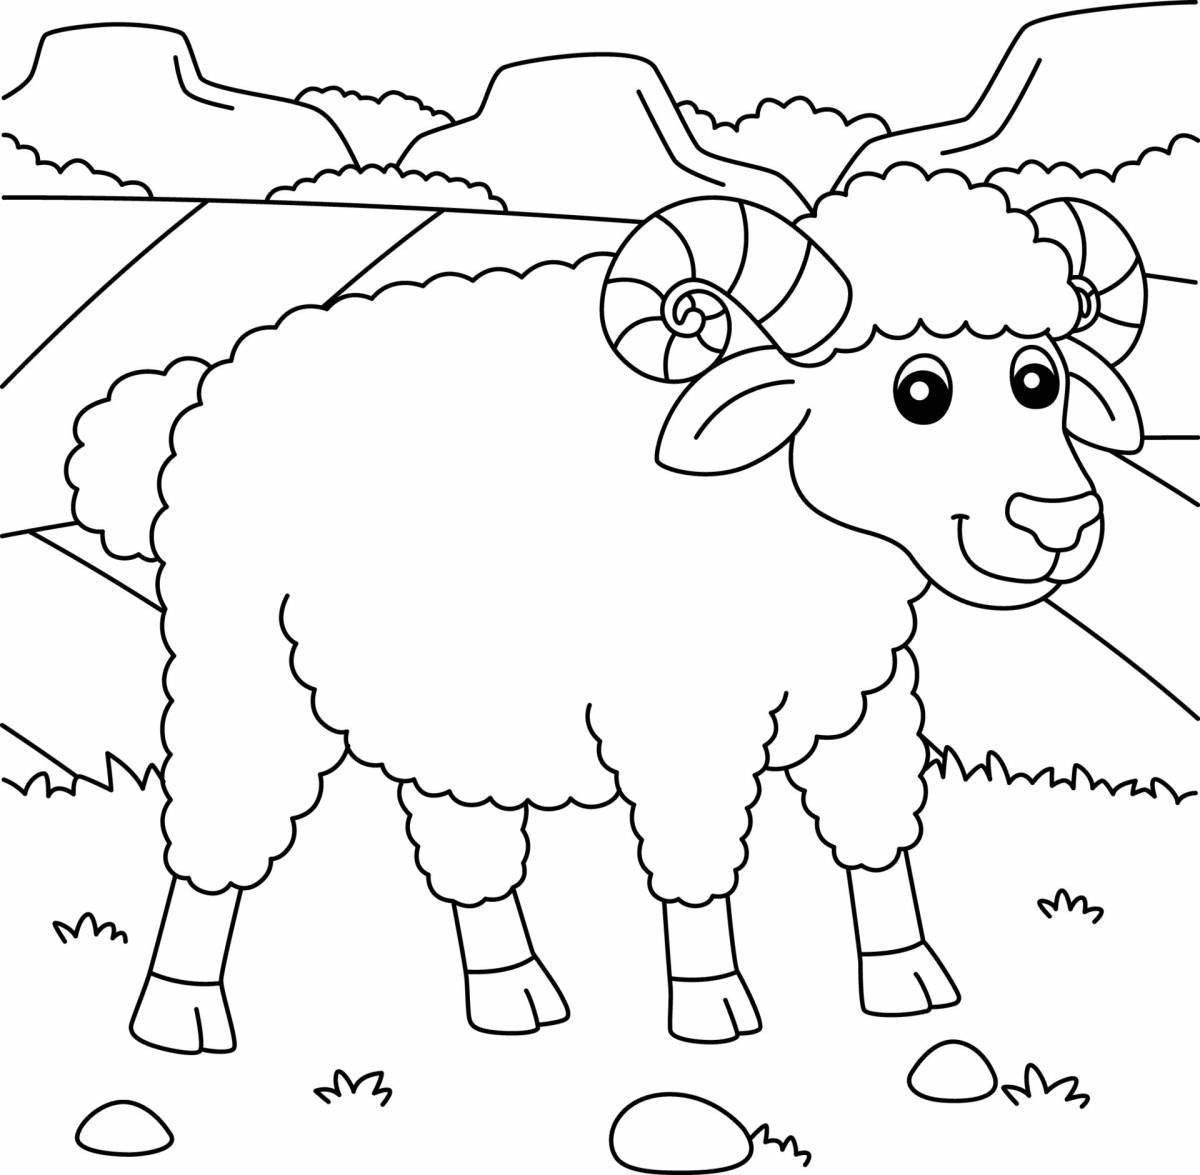 Fun coloring sheep for 4-5 year olds